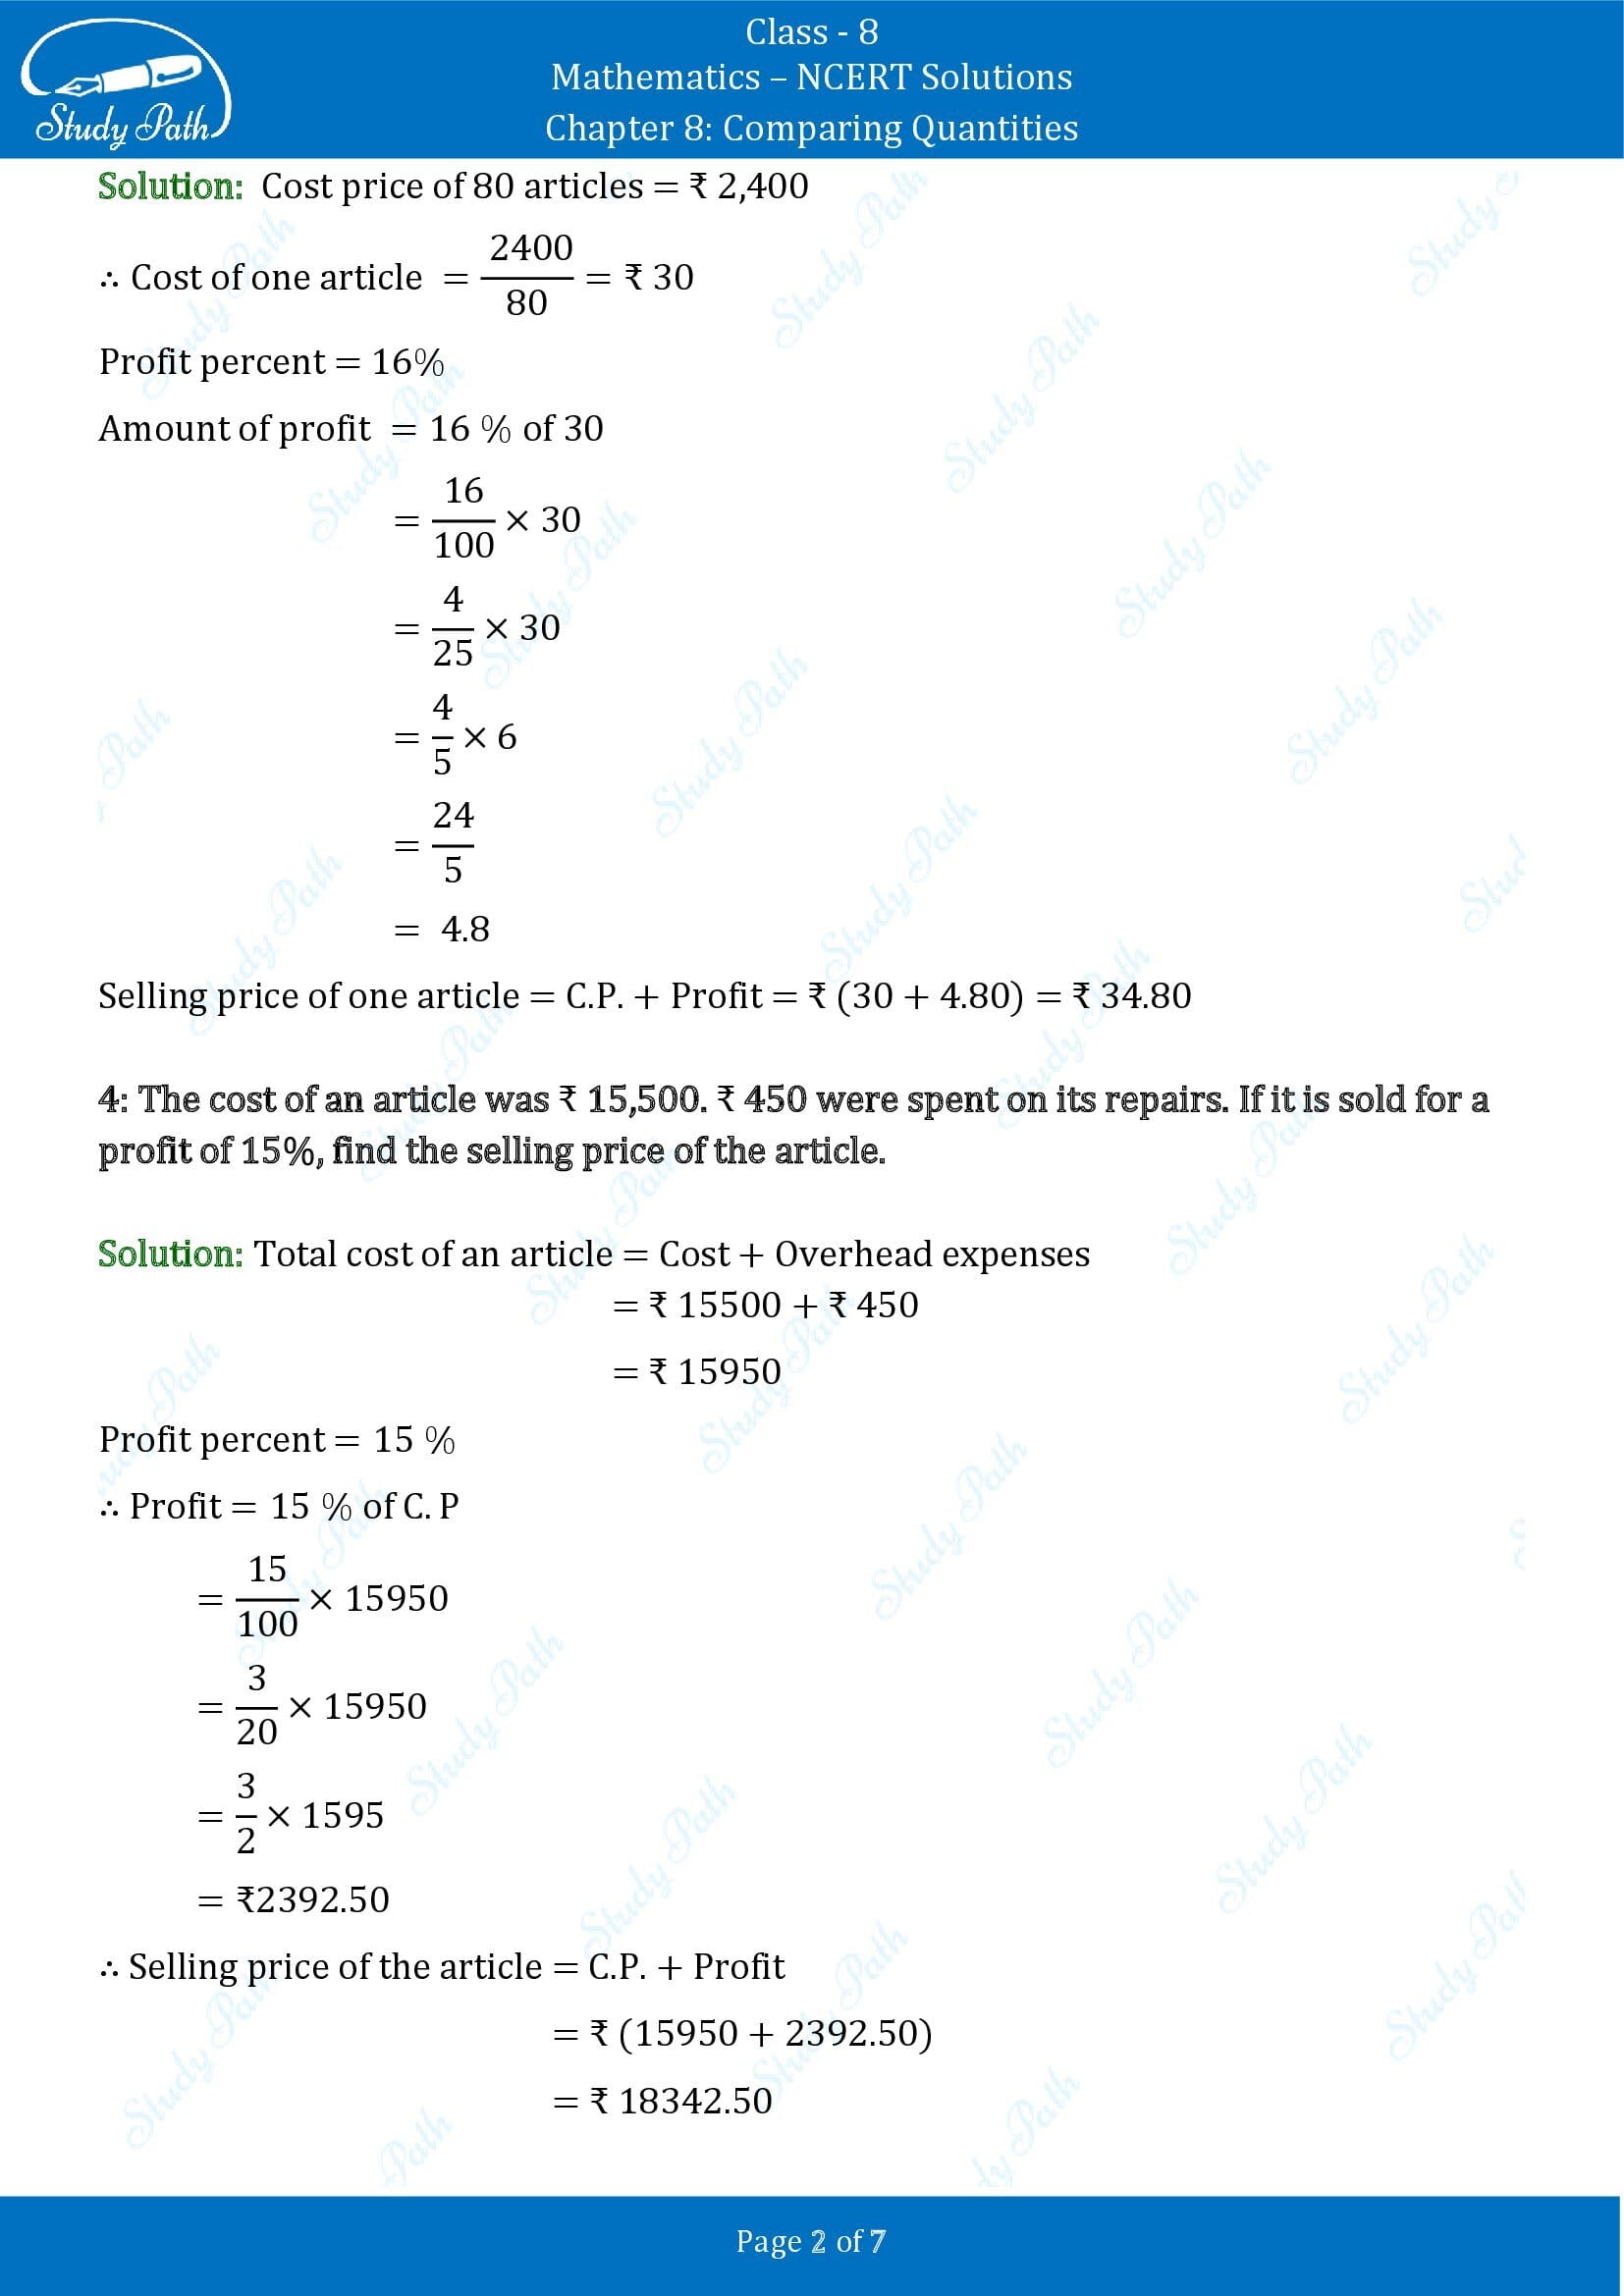 NCERT Solutions for Class 8 Maths Chapter 8 Comparing Quantities Exercise 8.2 00002